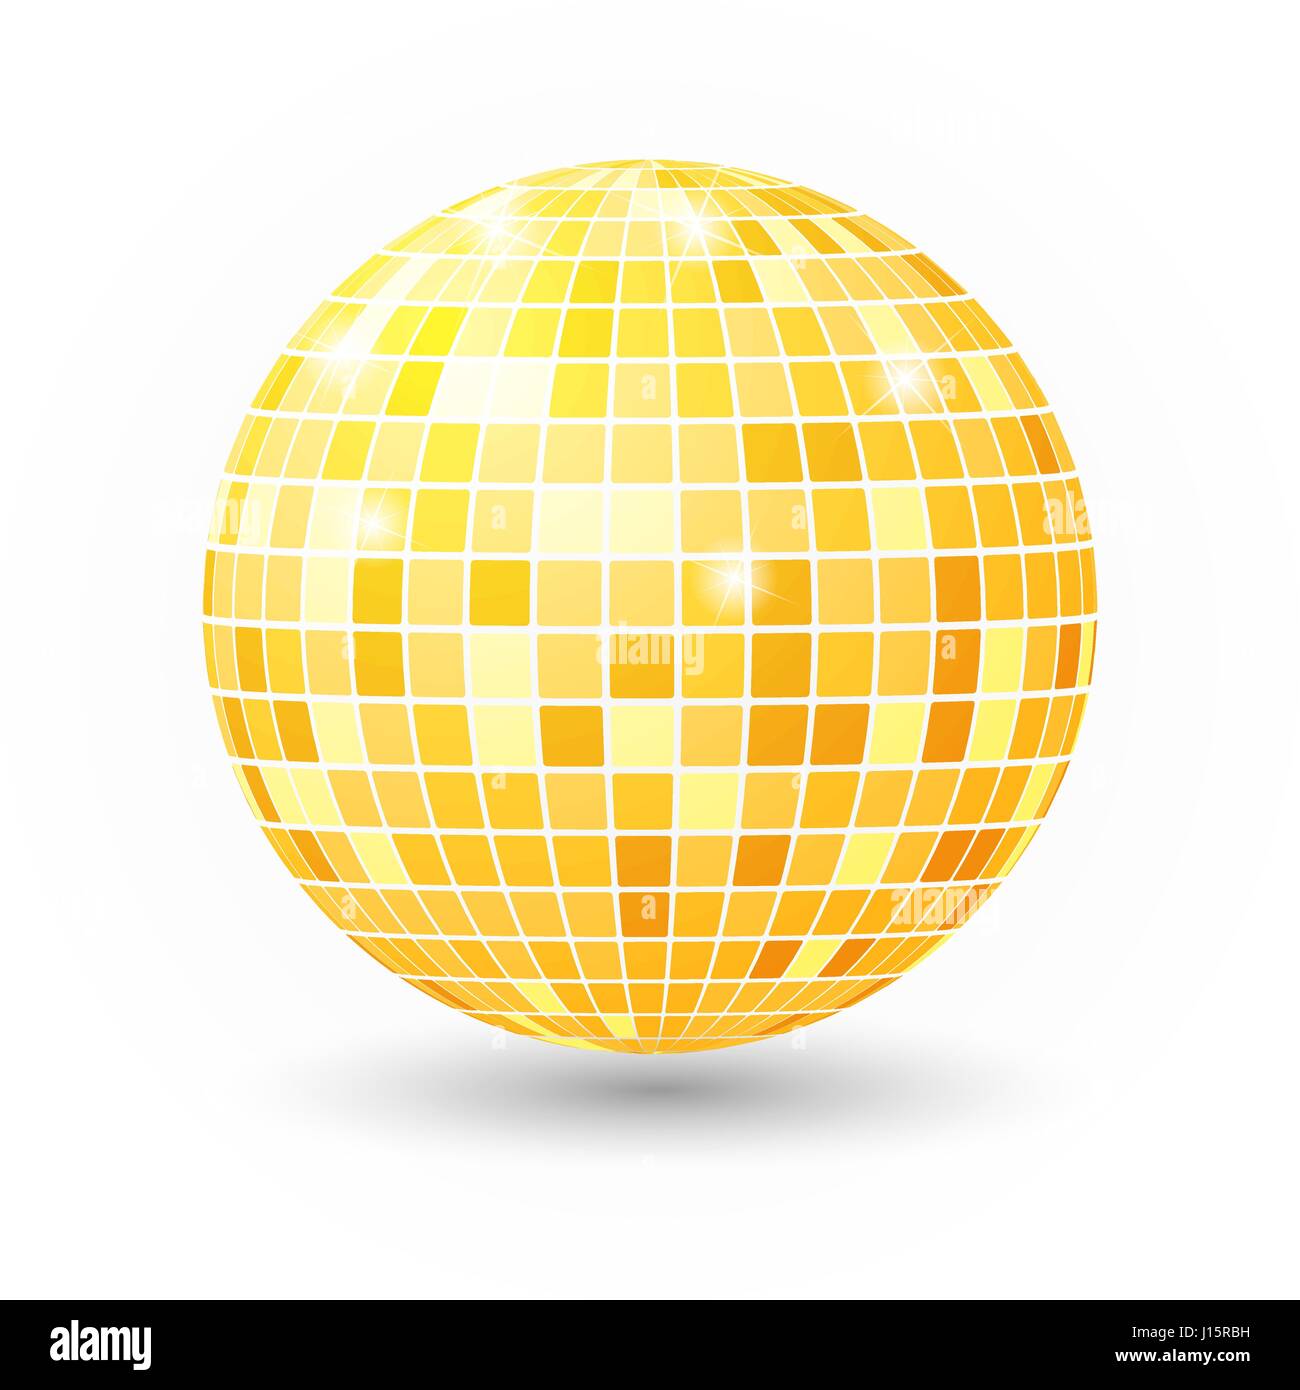 Disco ball isolated illustration. Night Club party light element. Bright mirror golden ball design for disco dance club. Stock Vector